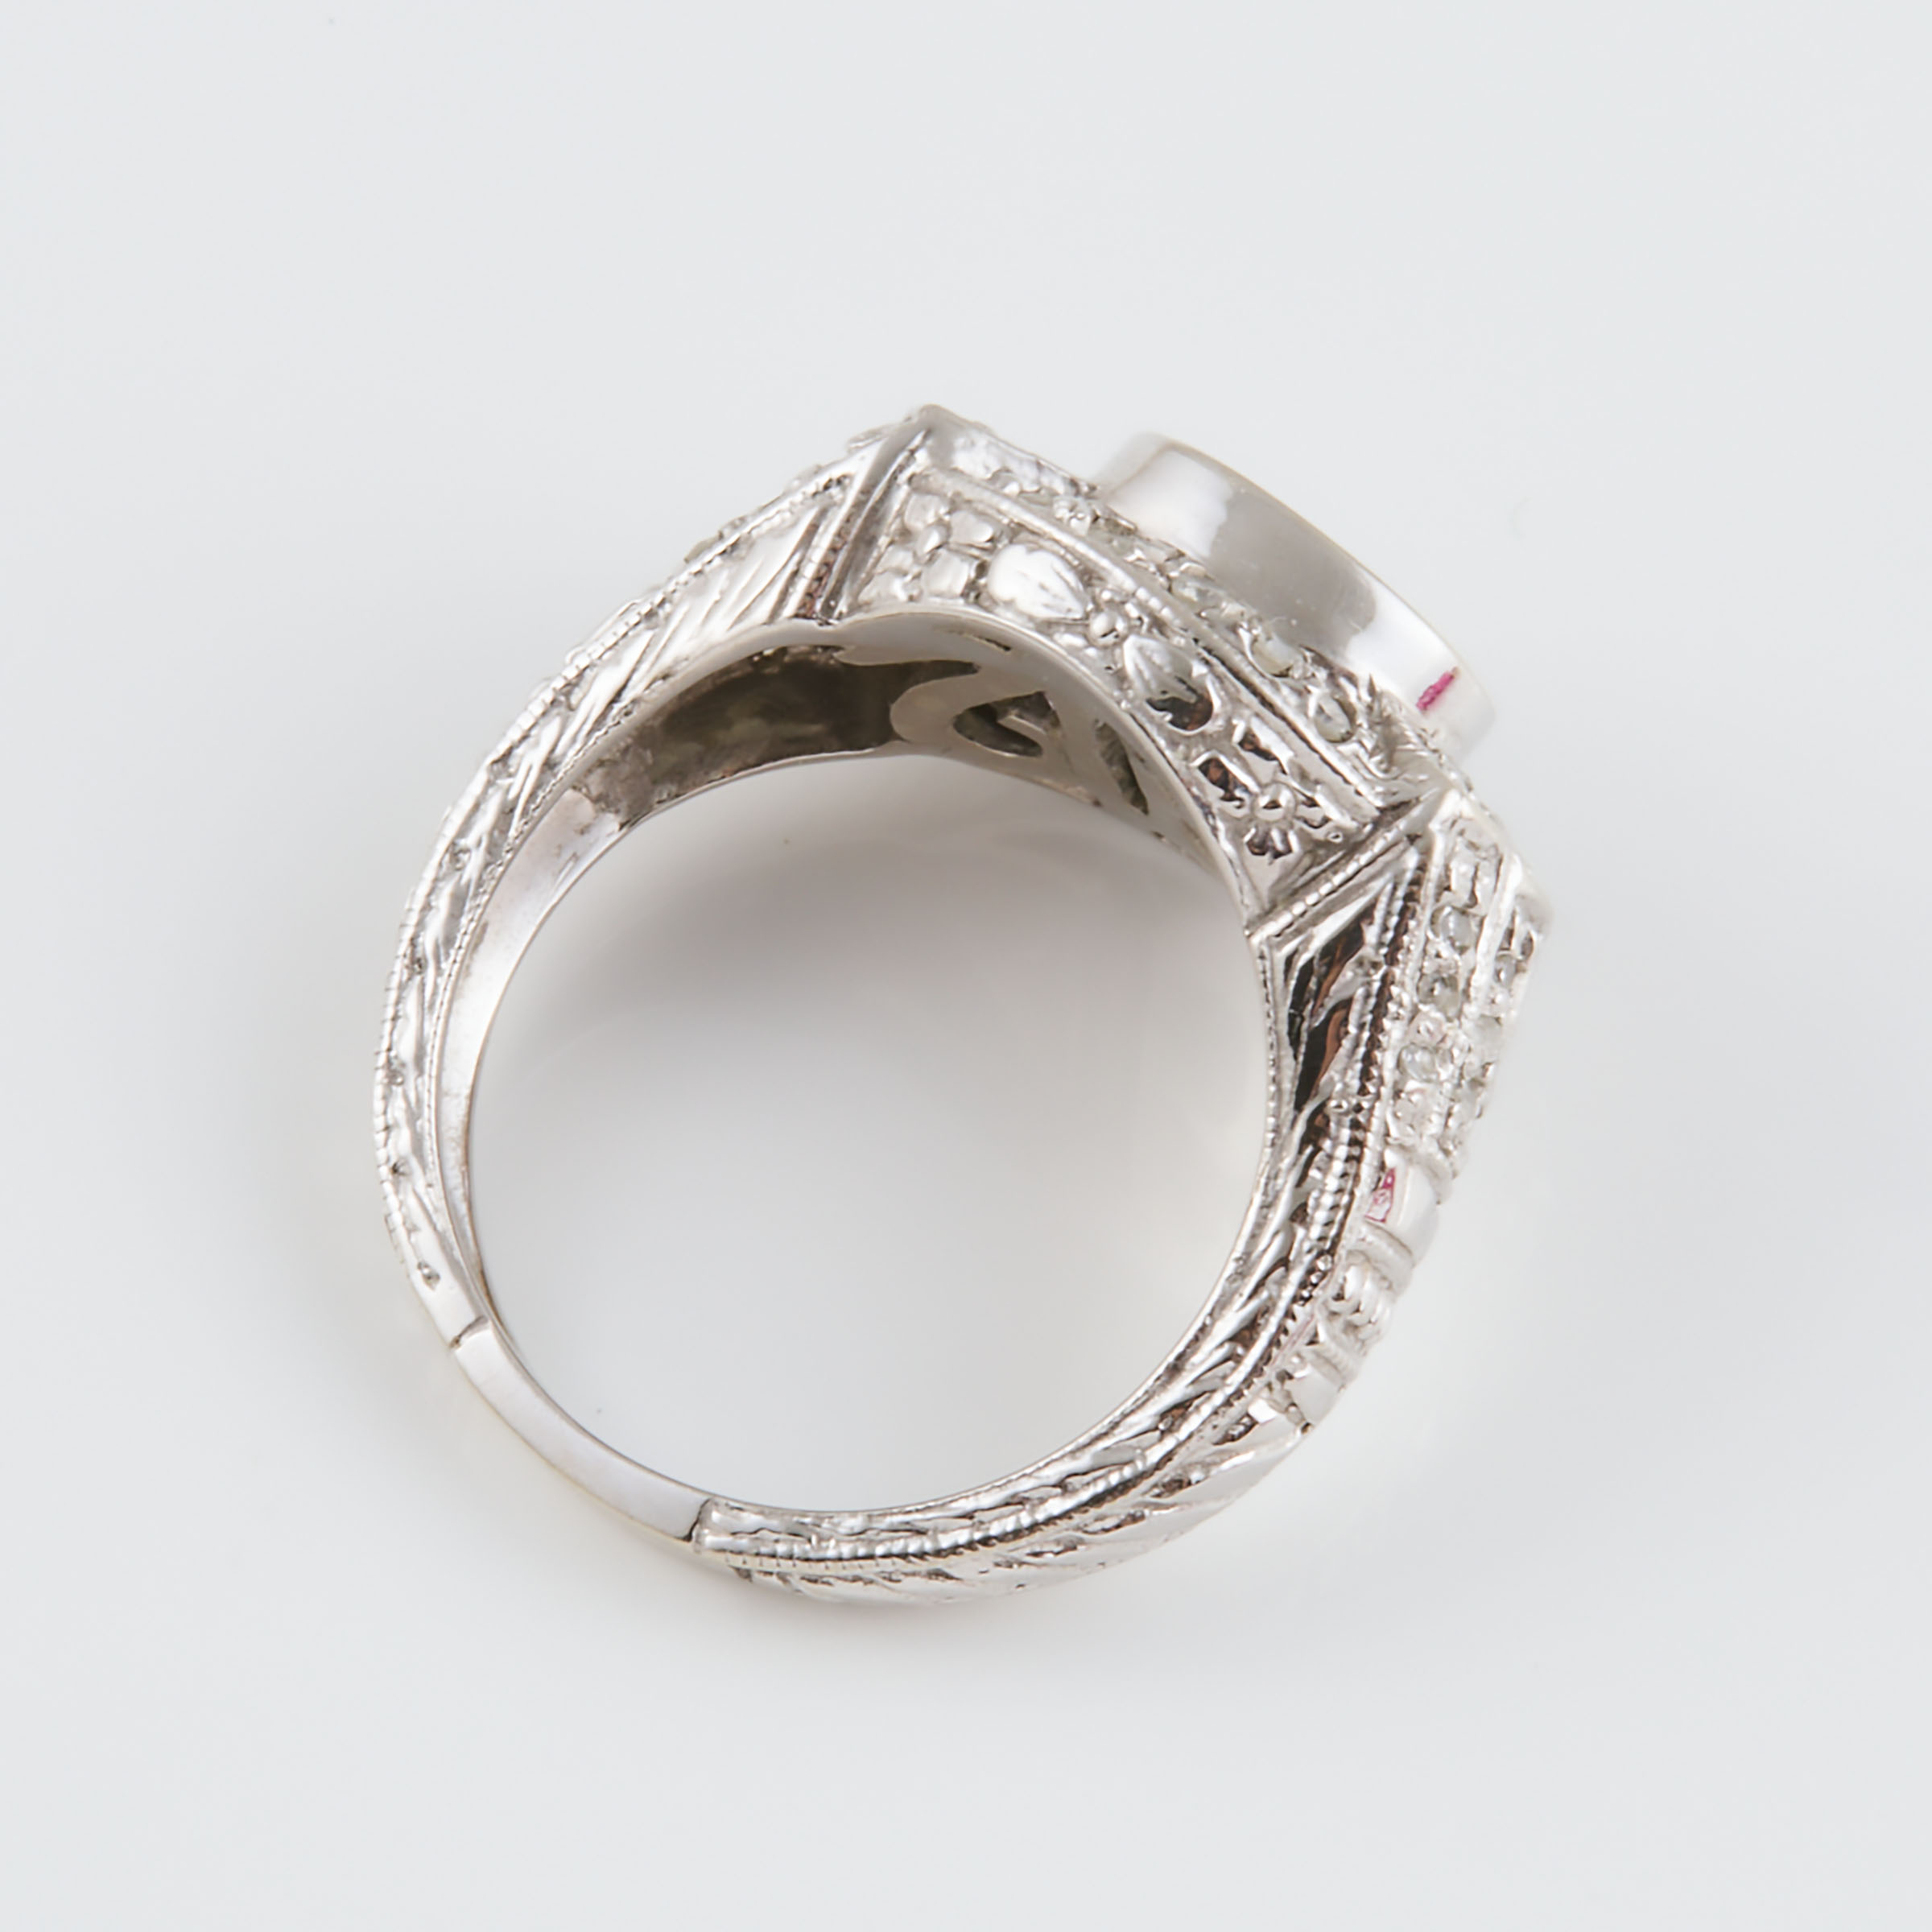 Weinman Brothers American 14k White Gold Ring